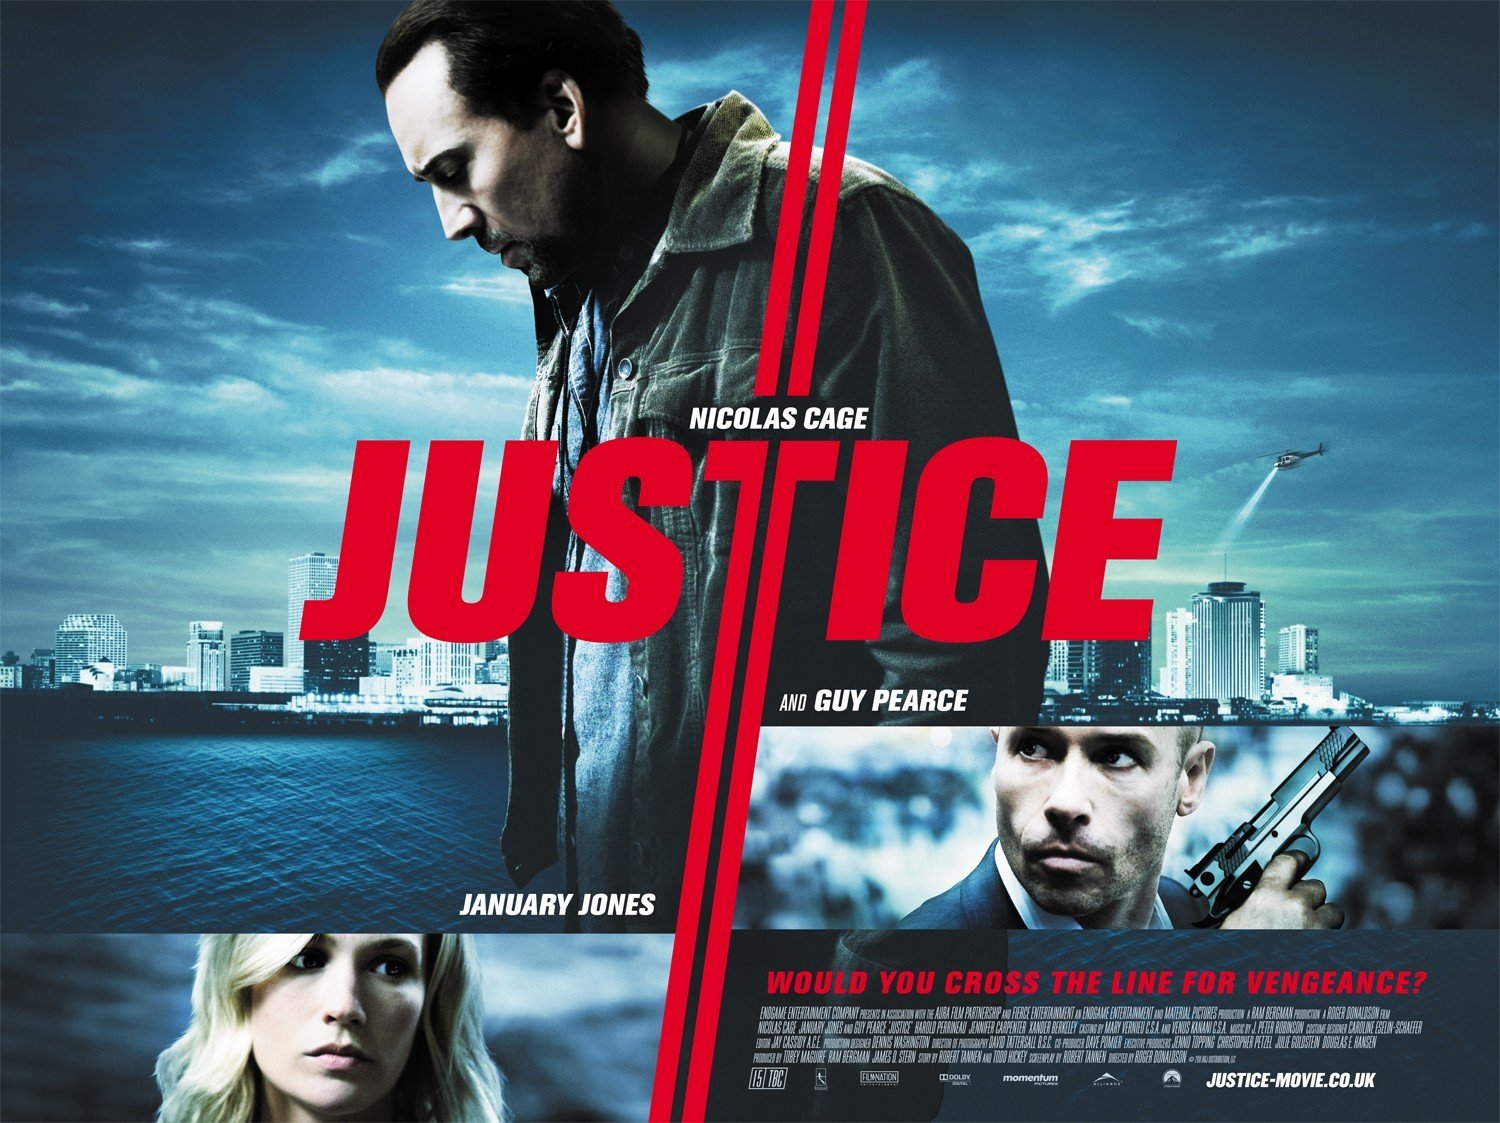 Poster of Anchor Bay Films' Seeking Justice (2012)